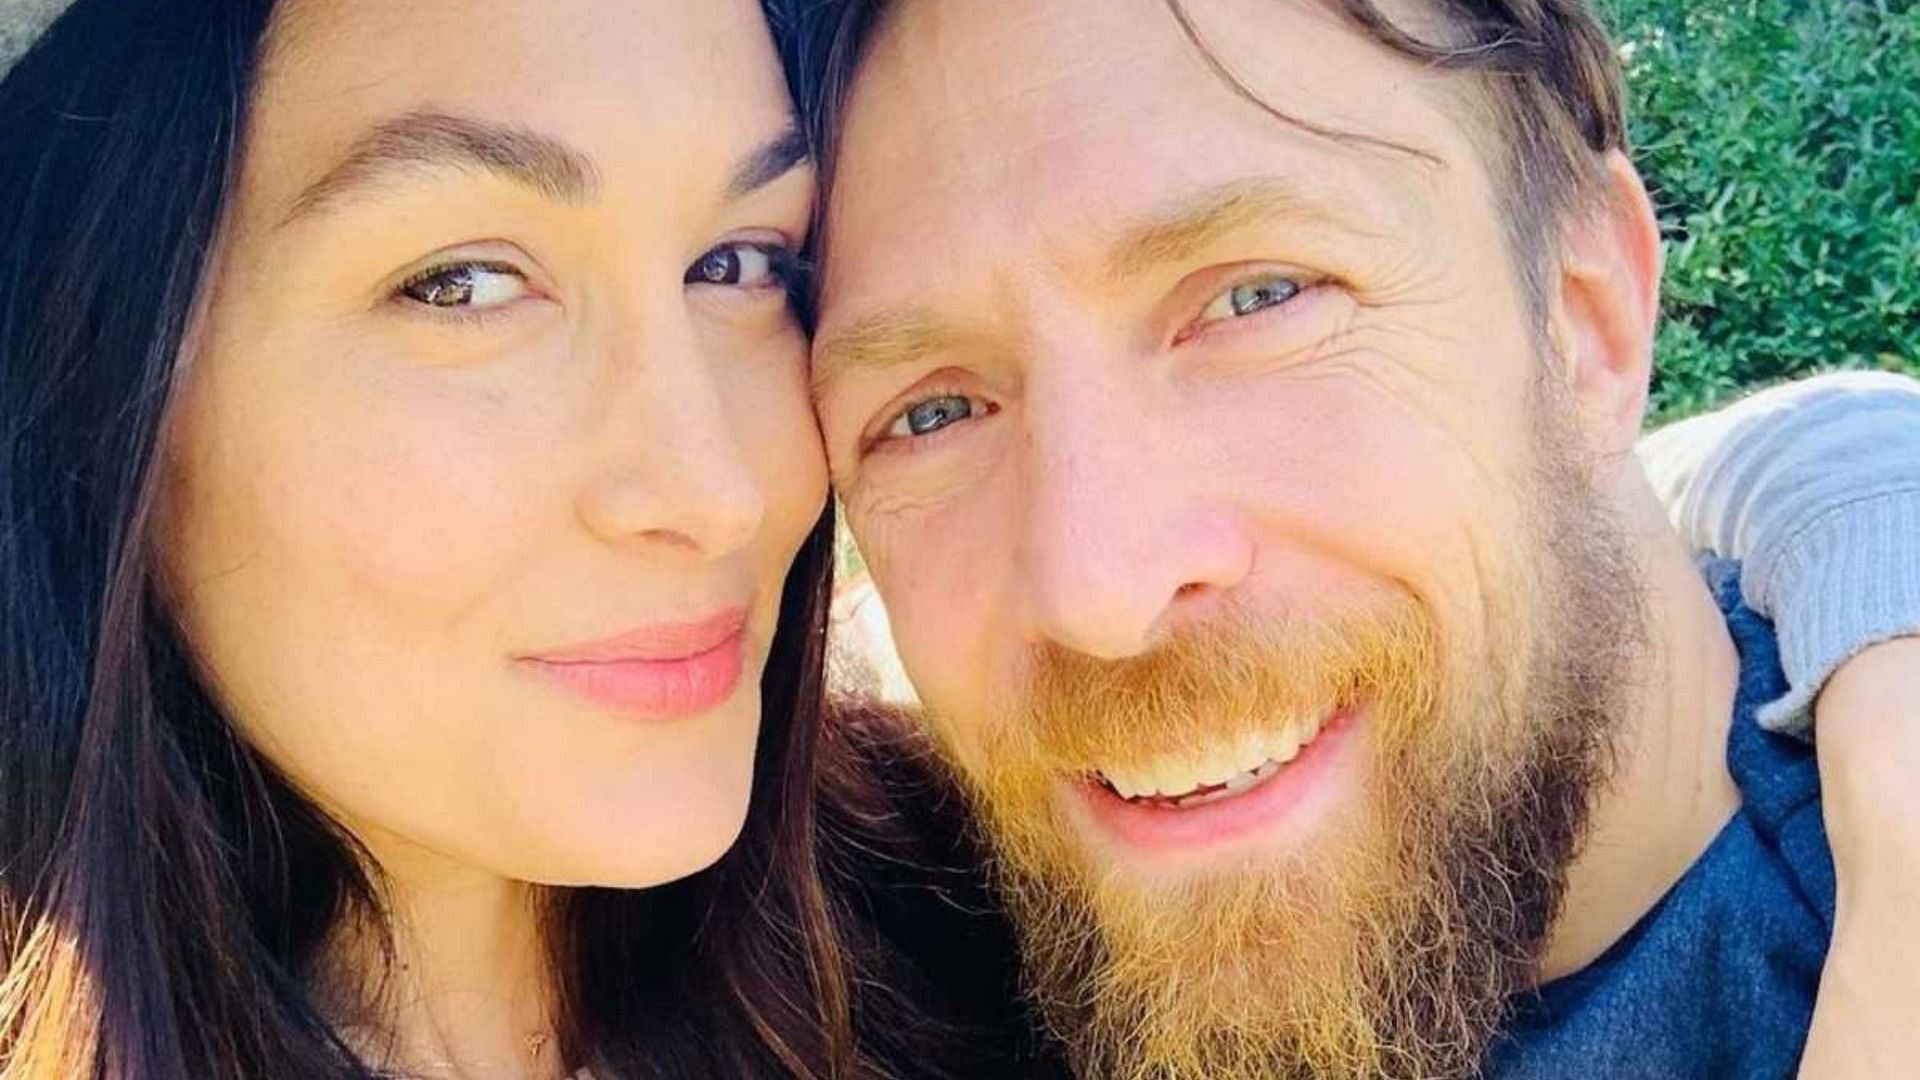 Brie Bella and Bryan Danielson have been happily married for eight years.